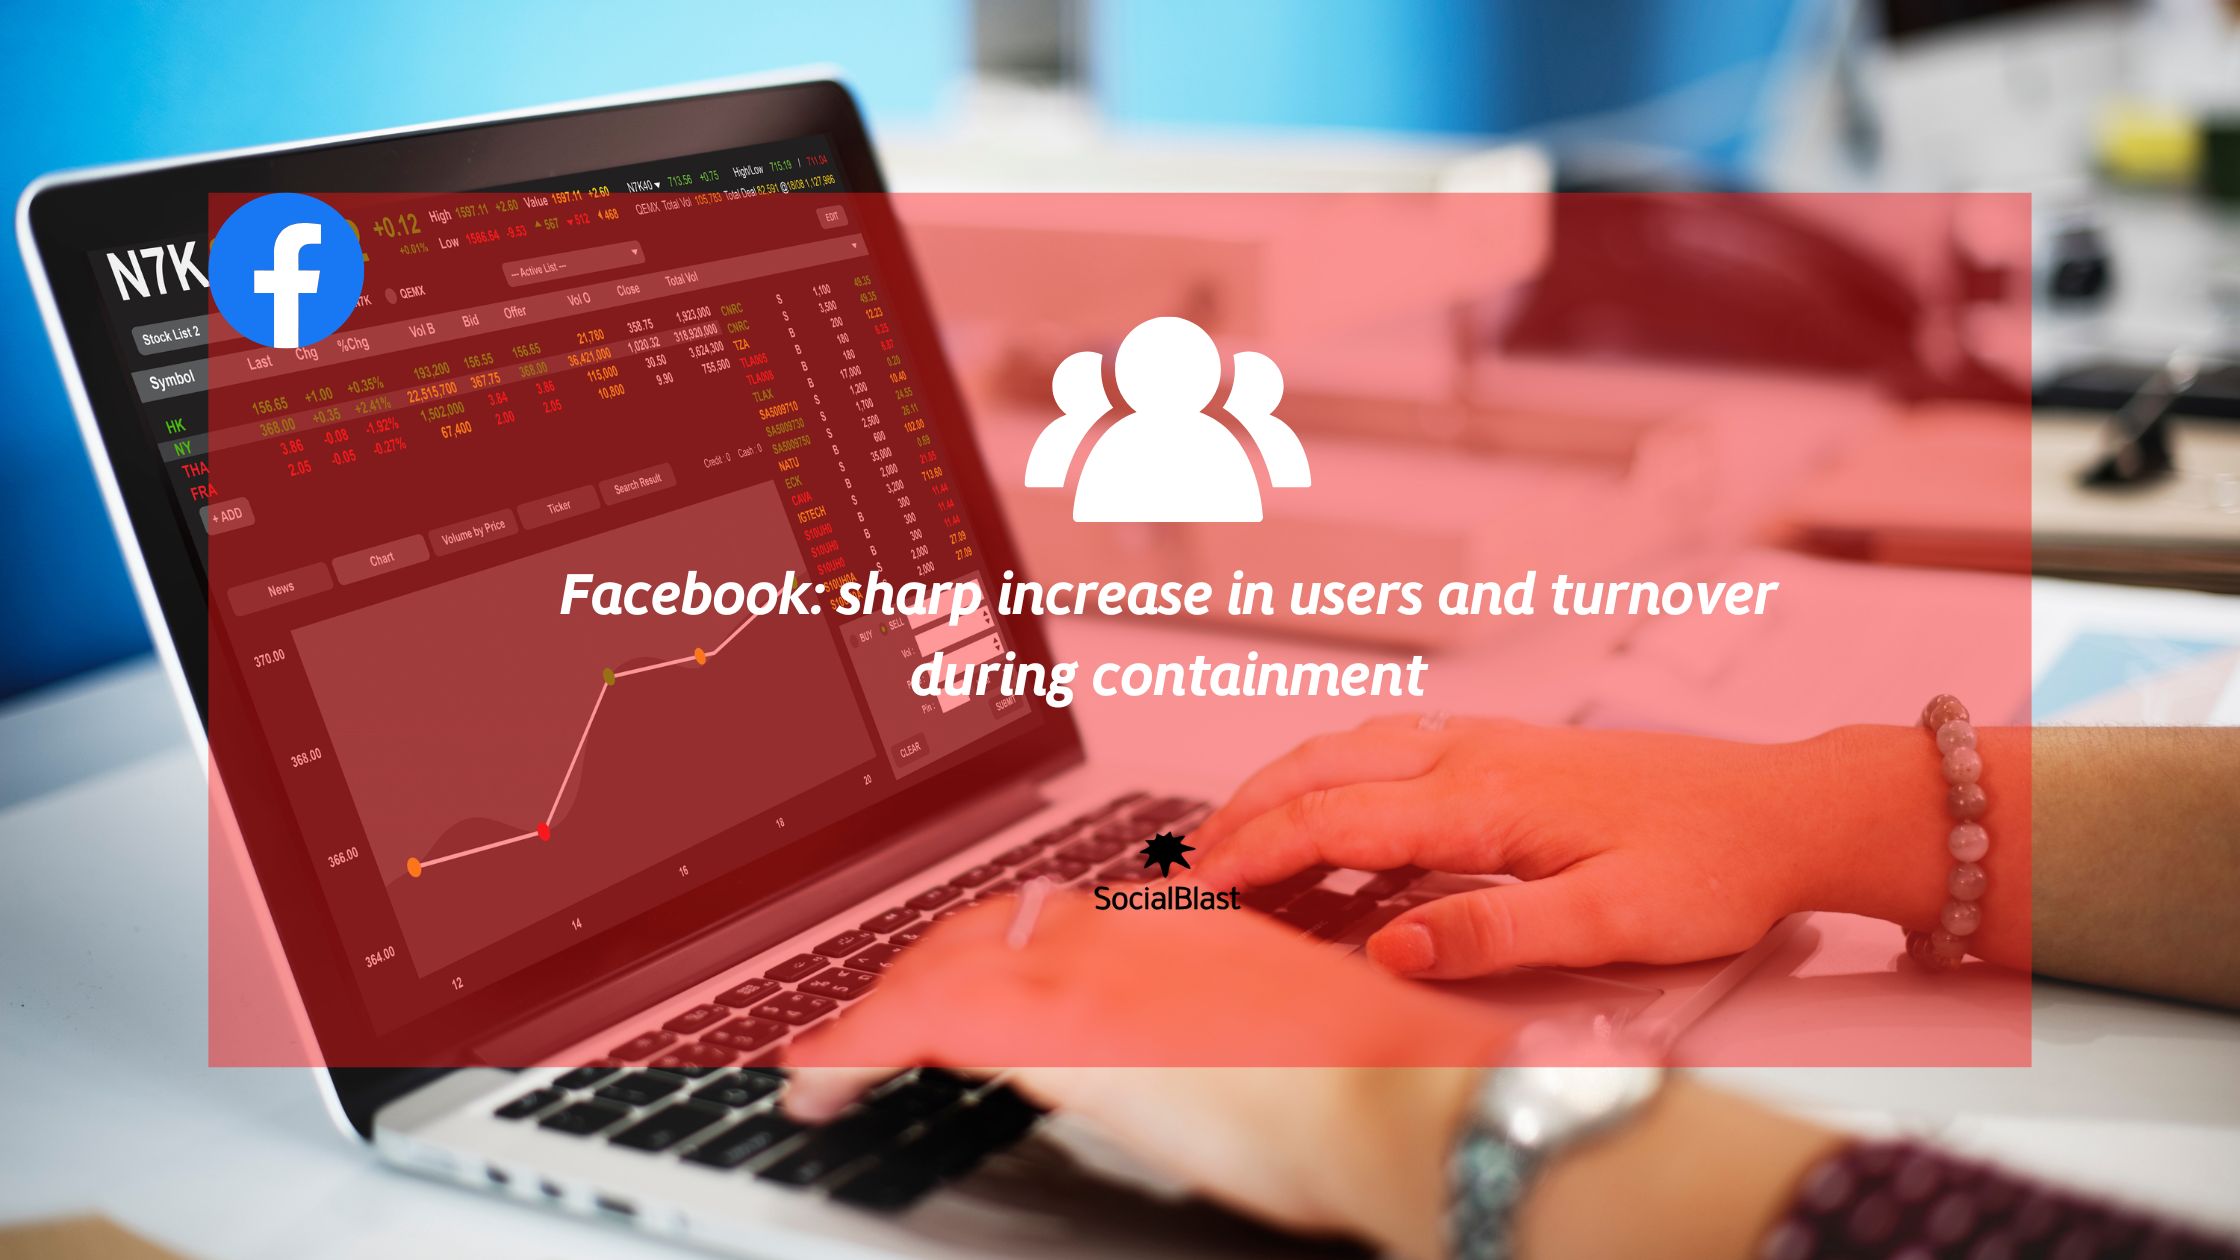 Facebook: sharp increase in users and turnover during containment